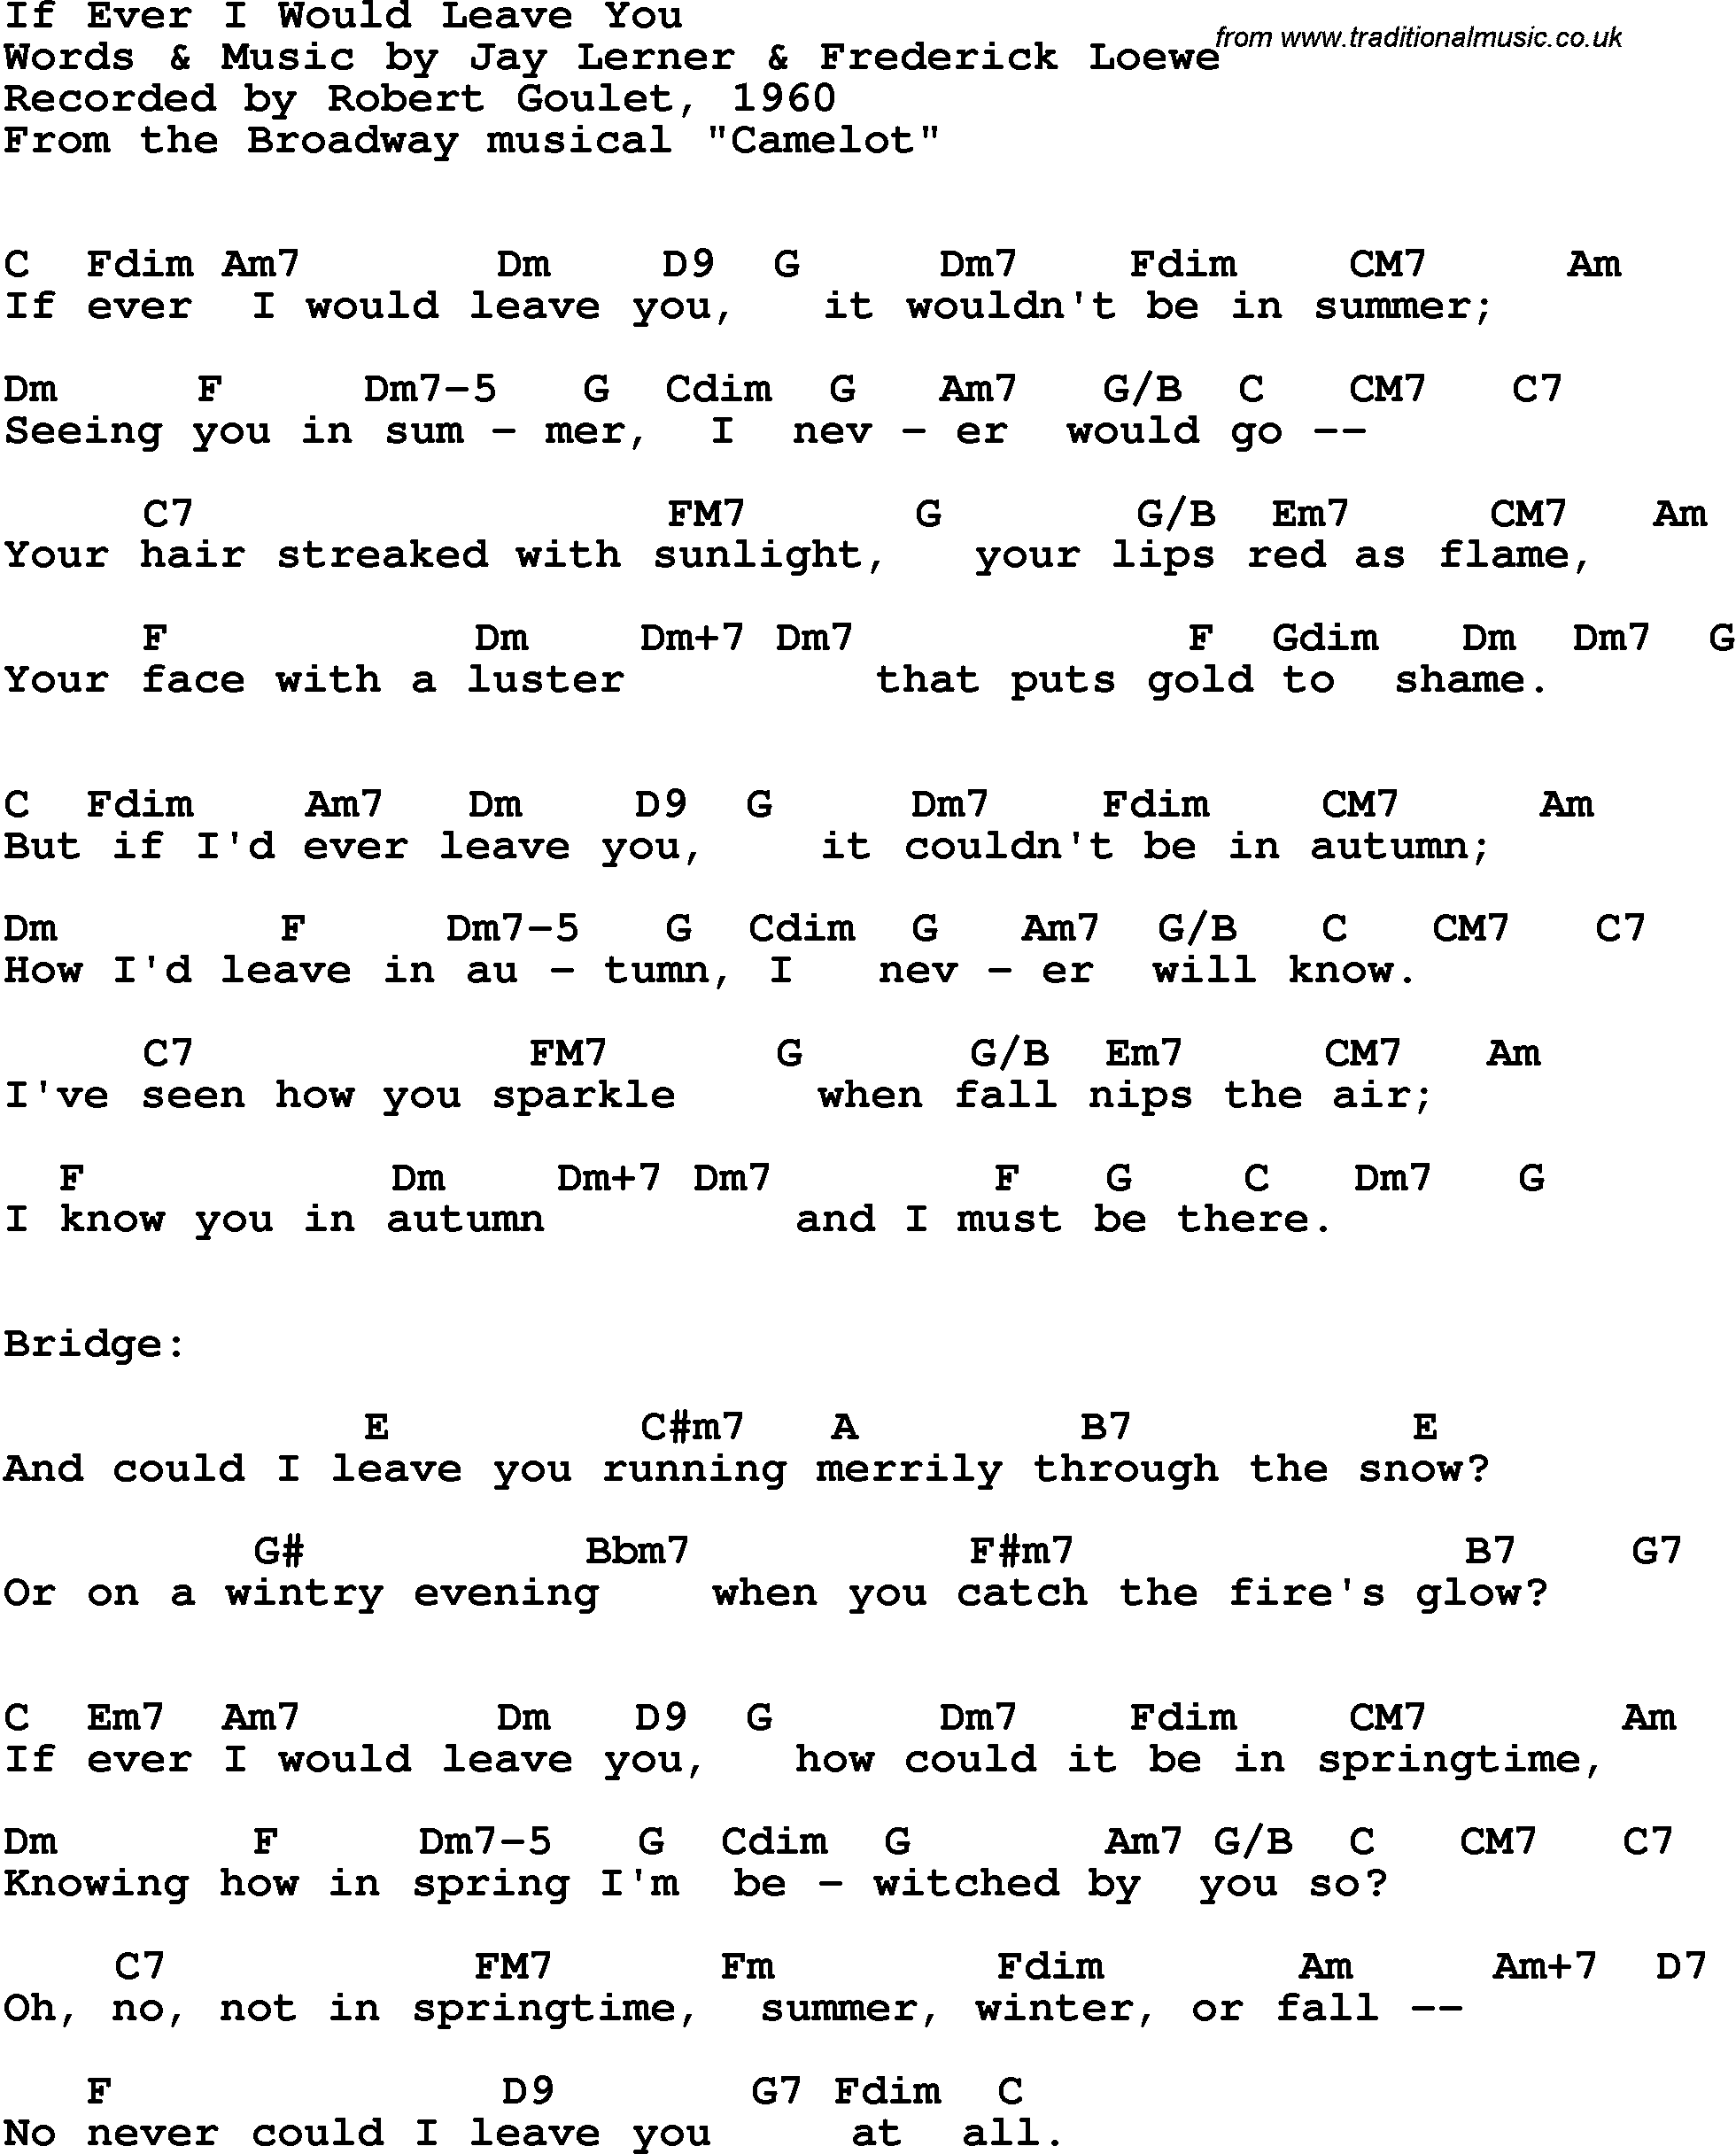 Song Lyrics with guitar chords for If Ever I Would Leave You - Robert Goulet, 1960